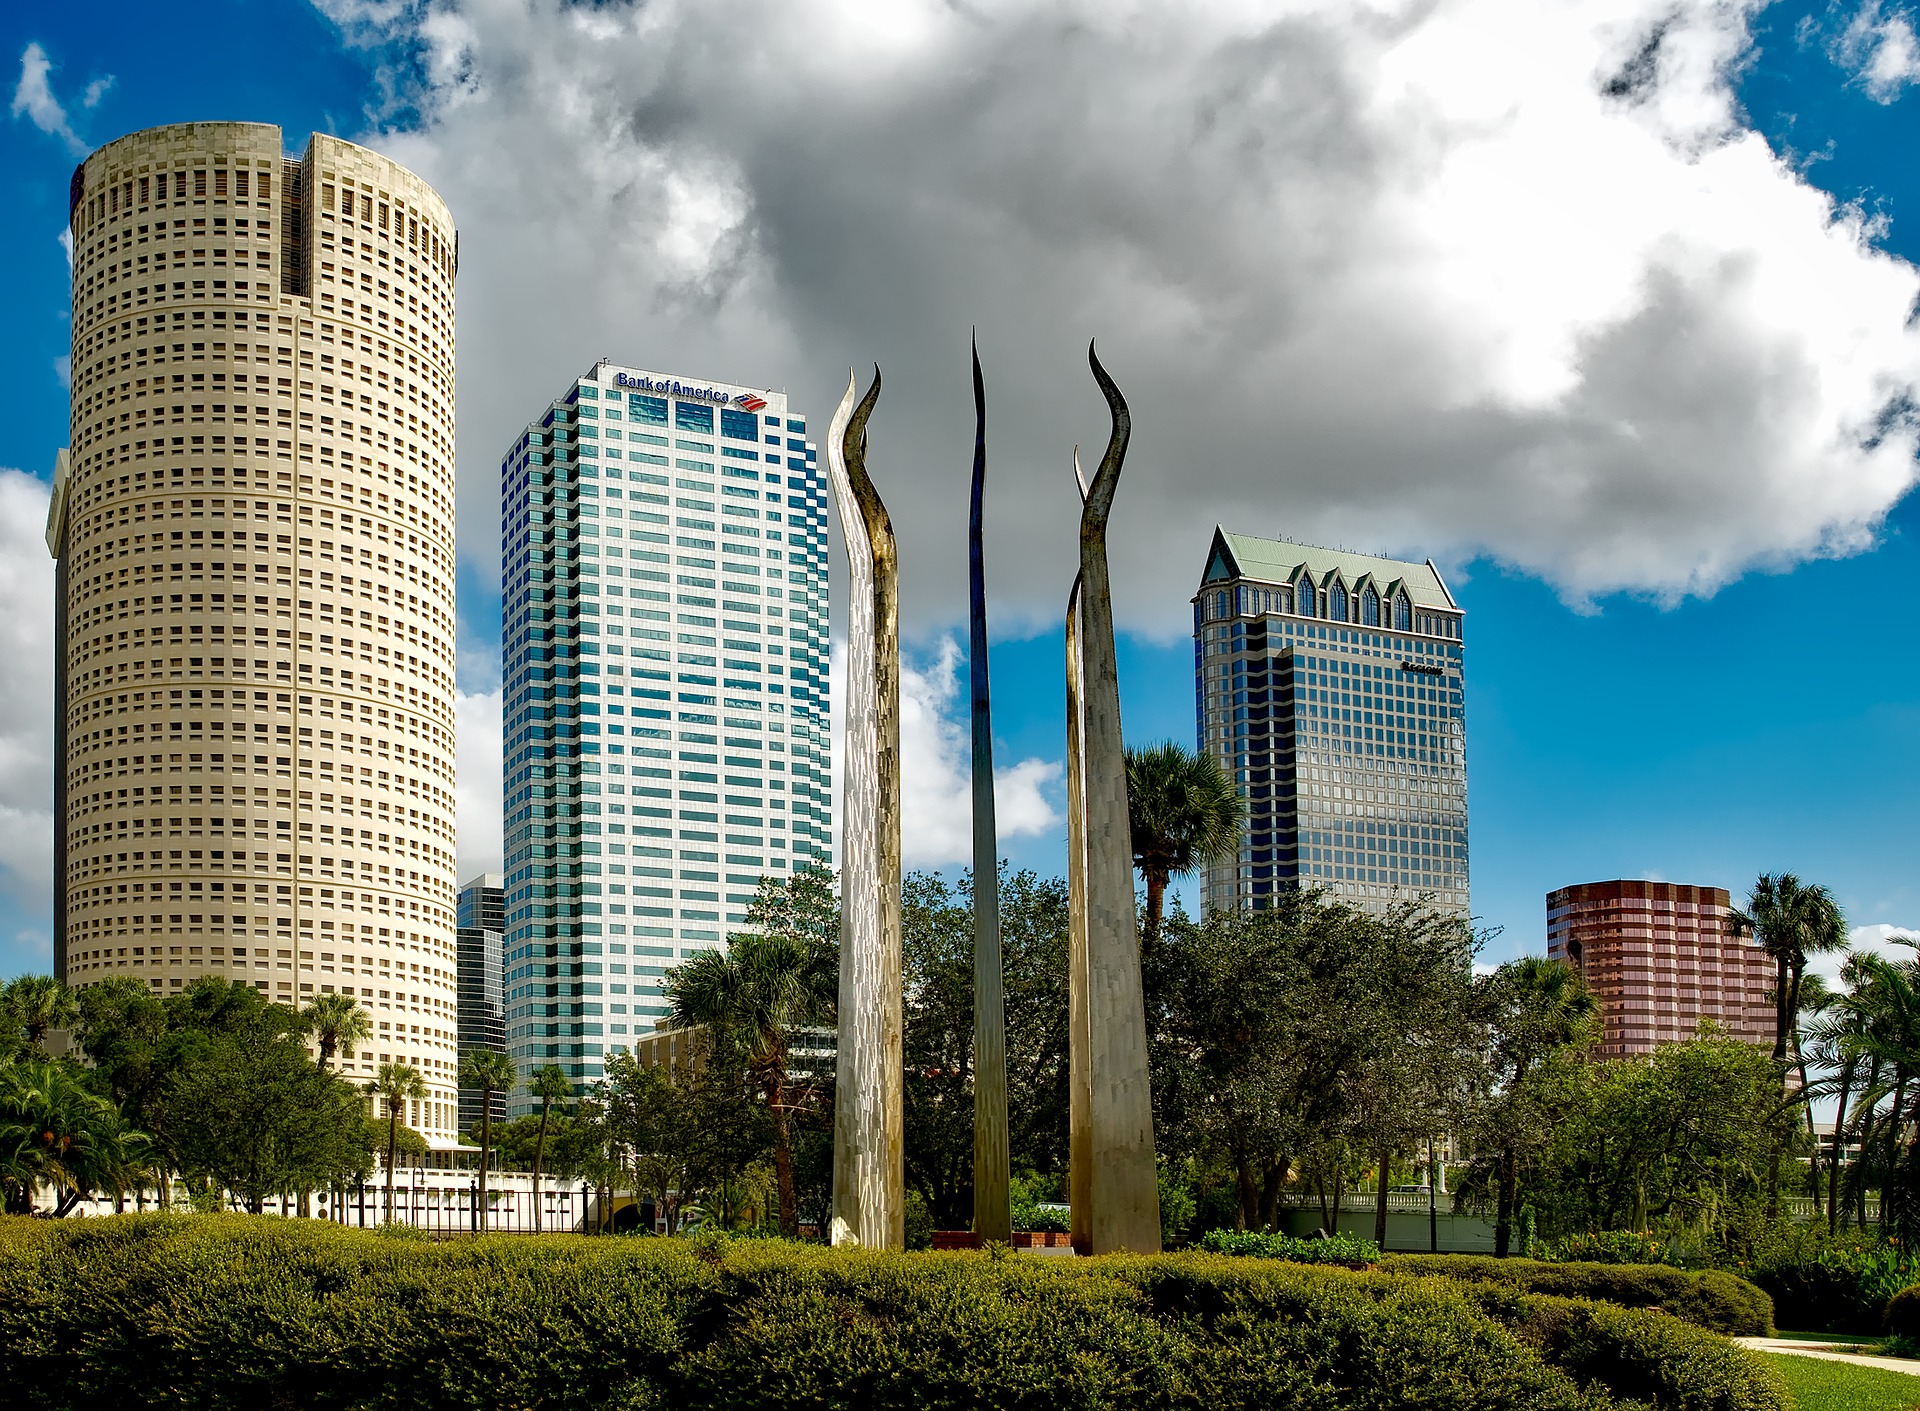 Moving to Tampa Fl - Best neighborhoods and suburbs